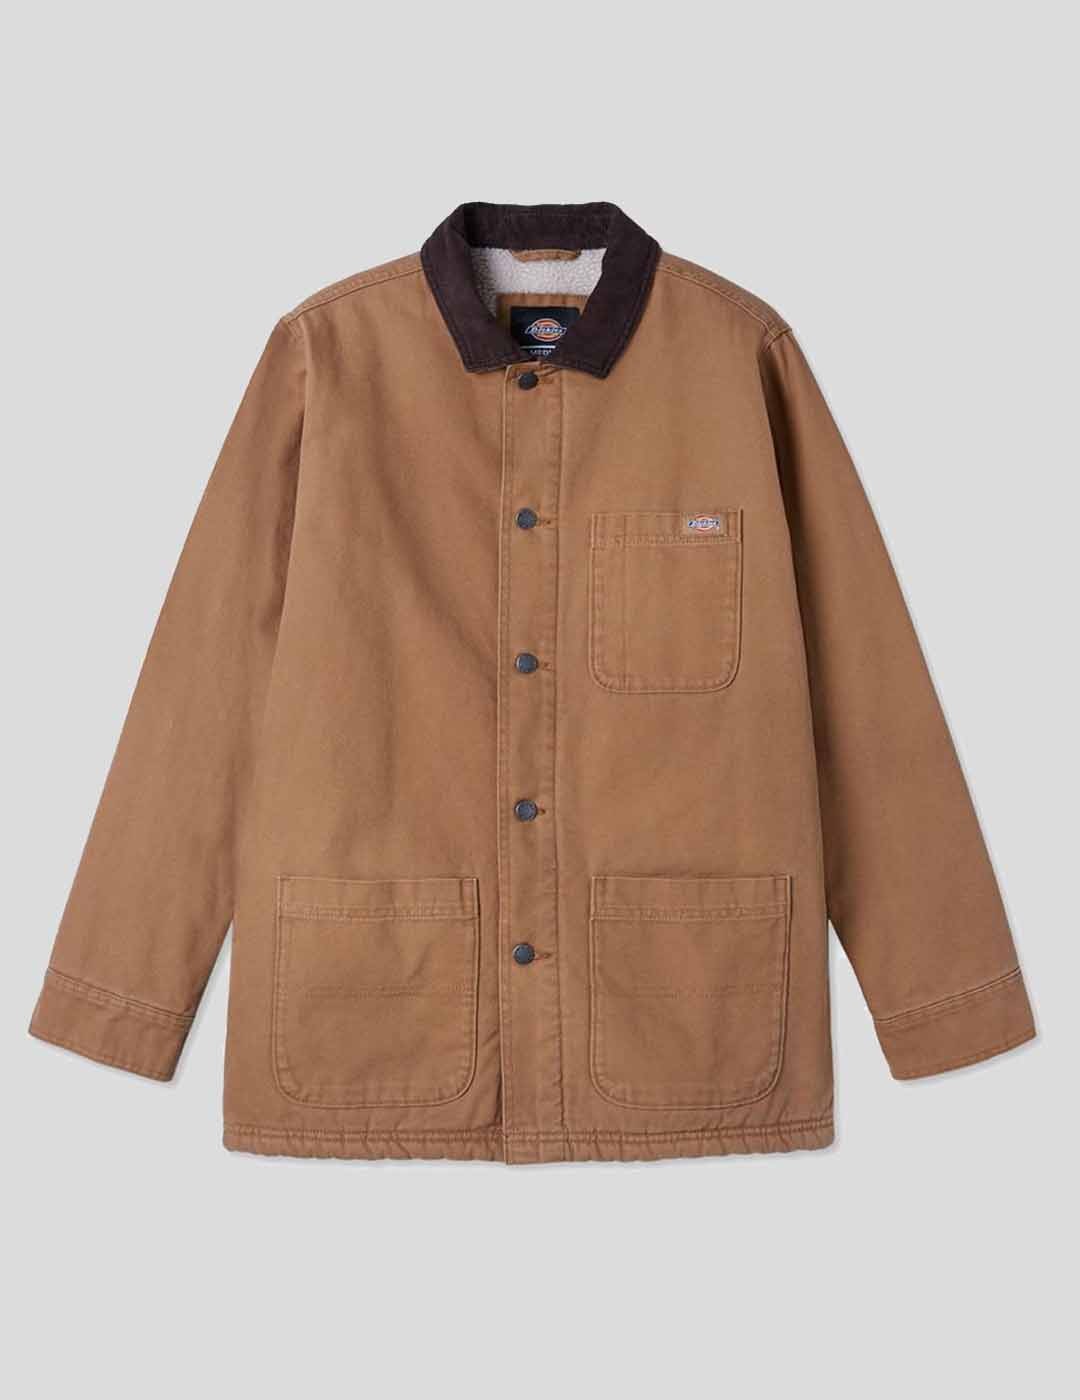 CHAQUETA DICKIES DUCK CANVAS CHORE JACKET STONE WASHED BROWN DUCK